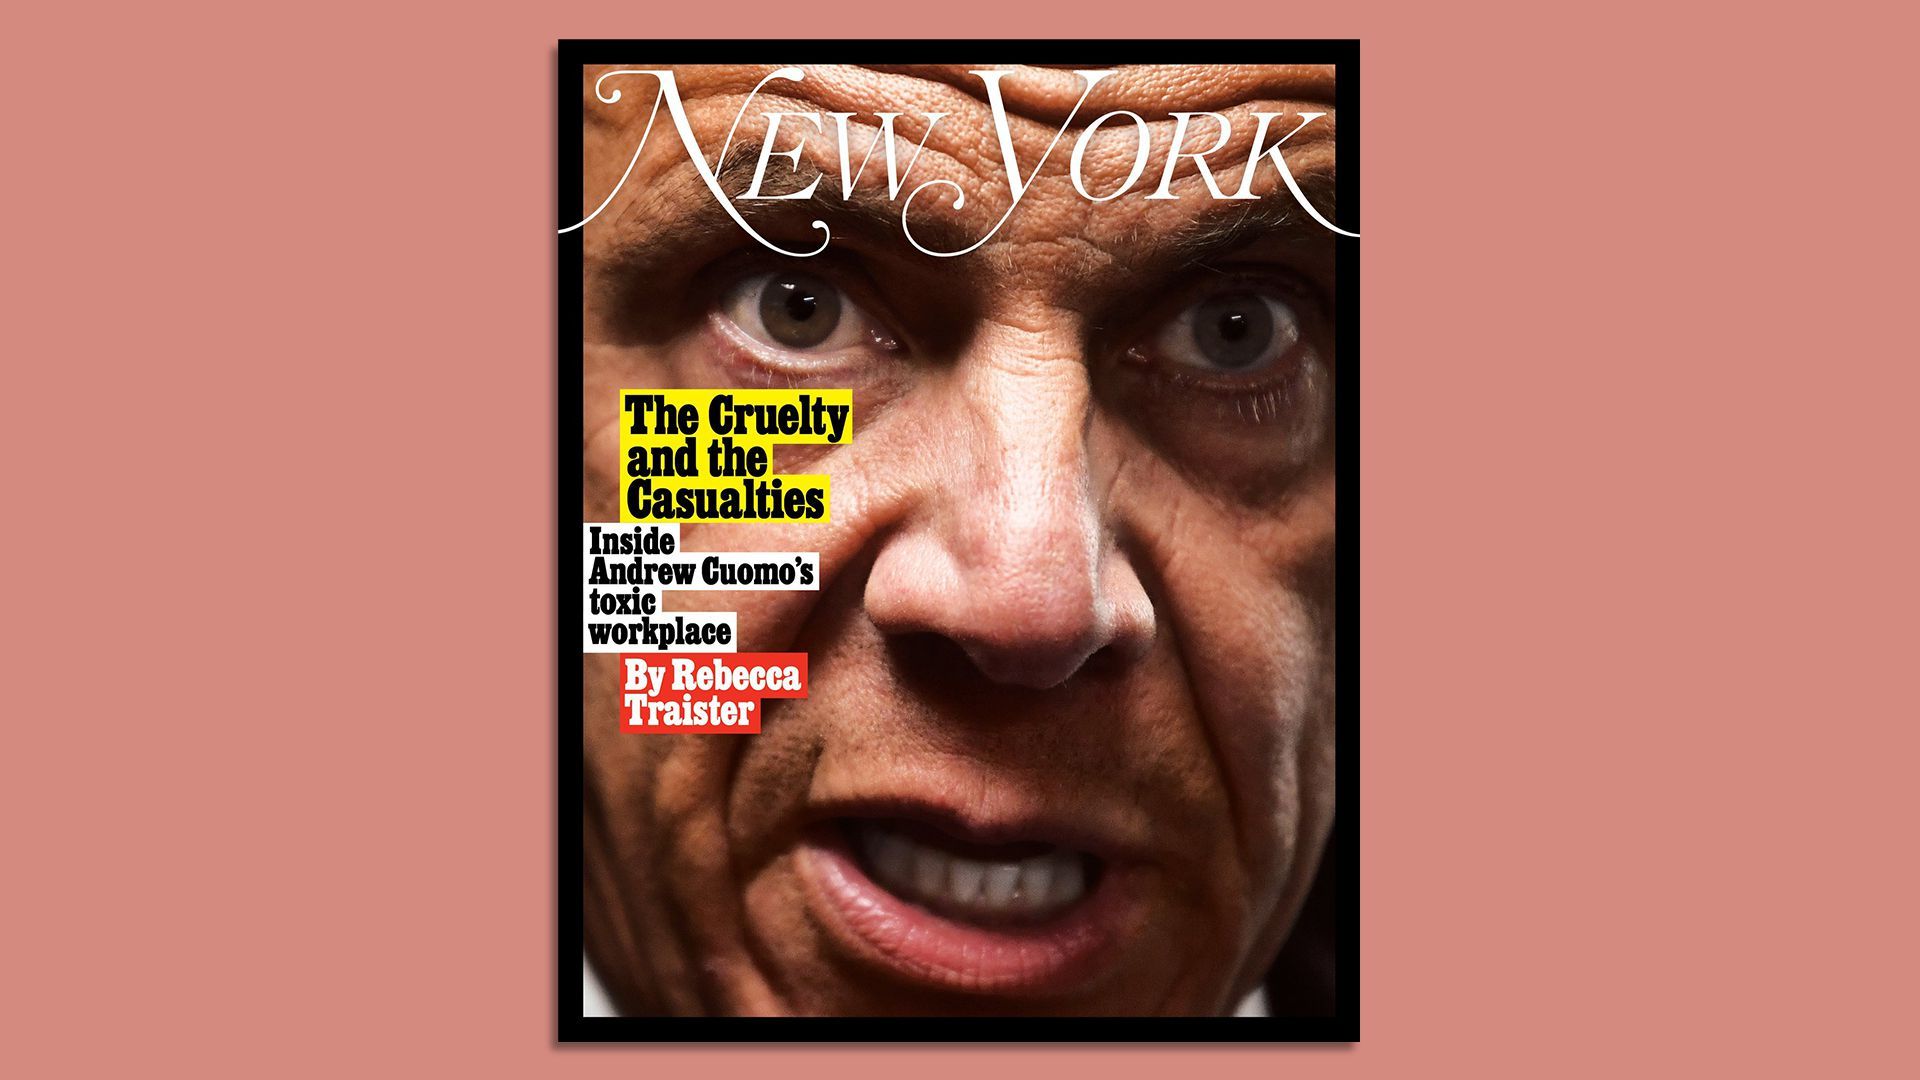 Picture of the cover of New York Magazine with a close up of Andrew Cuomo's face